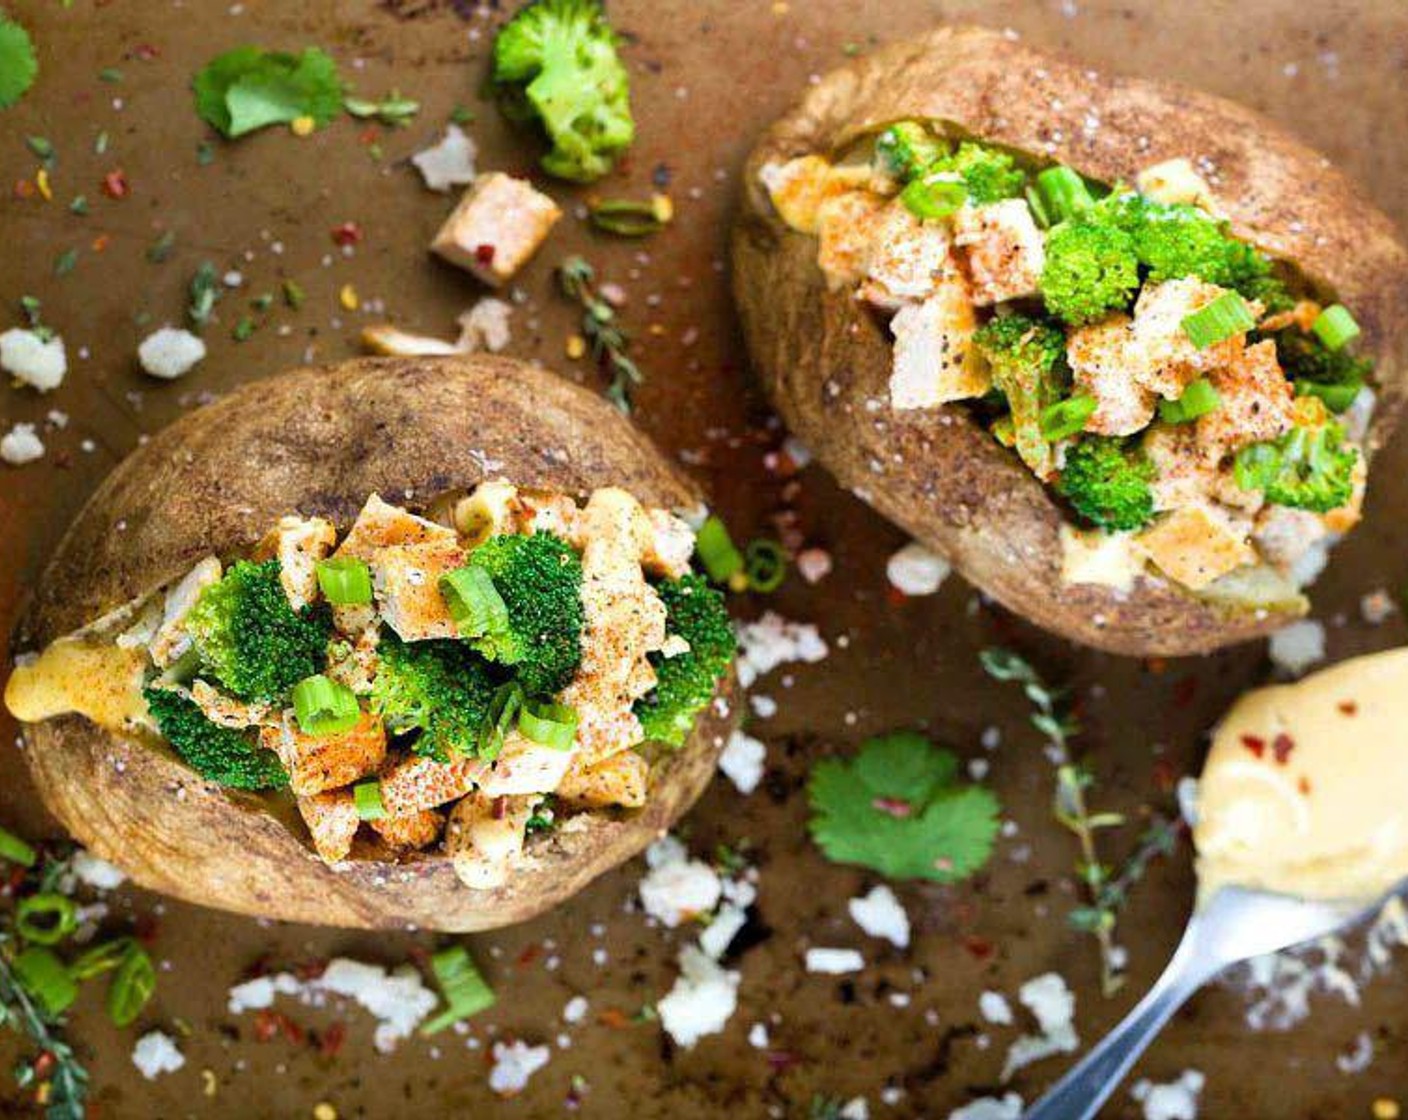 Chicken Broccoli Stuffed Baked Potato with Cheese